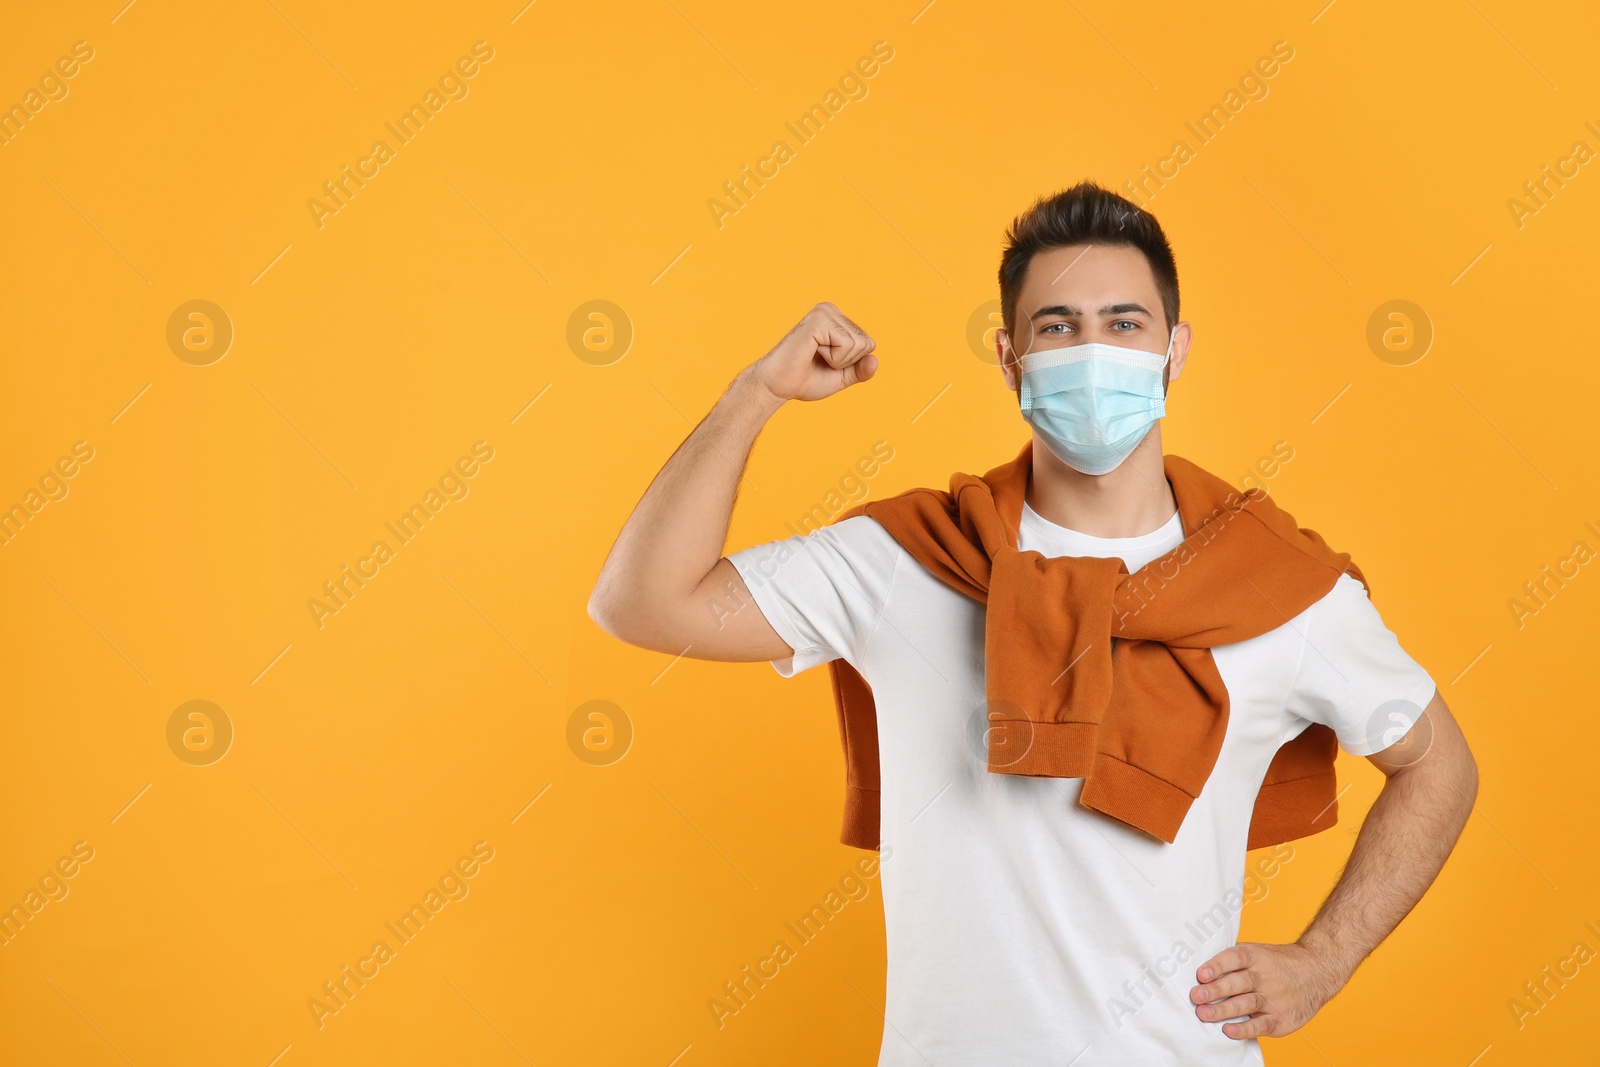 Photo of Man with protective mask showing muscles on yellow background, space for text. Strong immunity concept